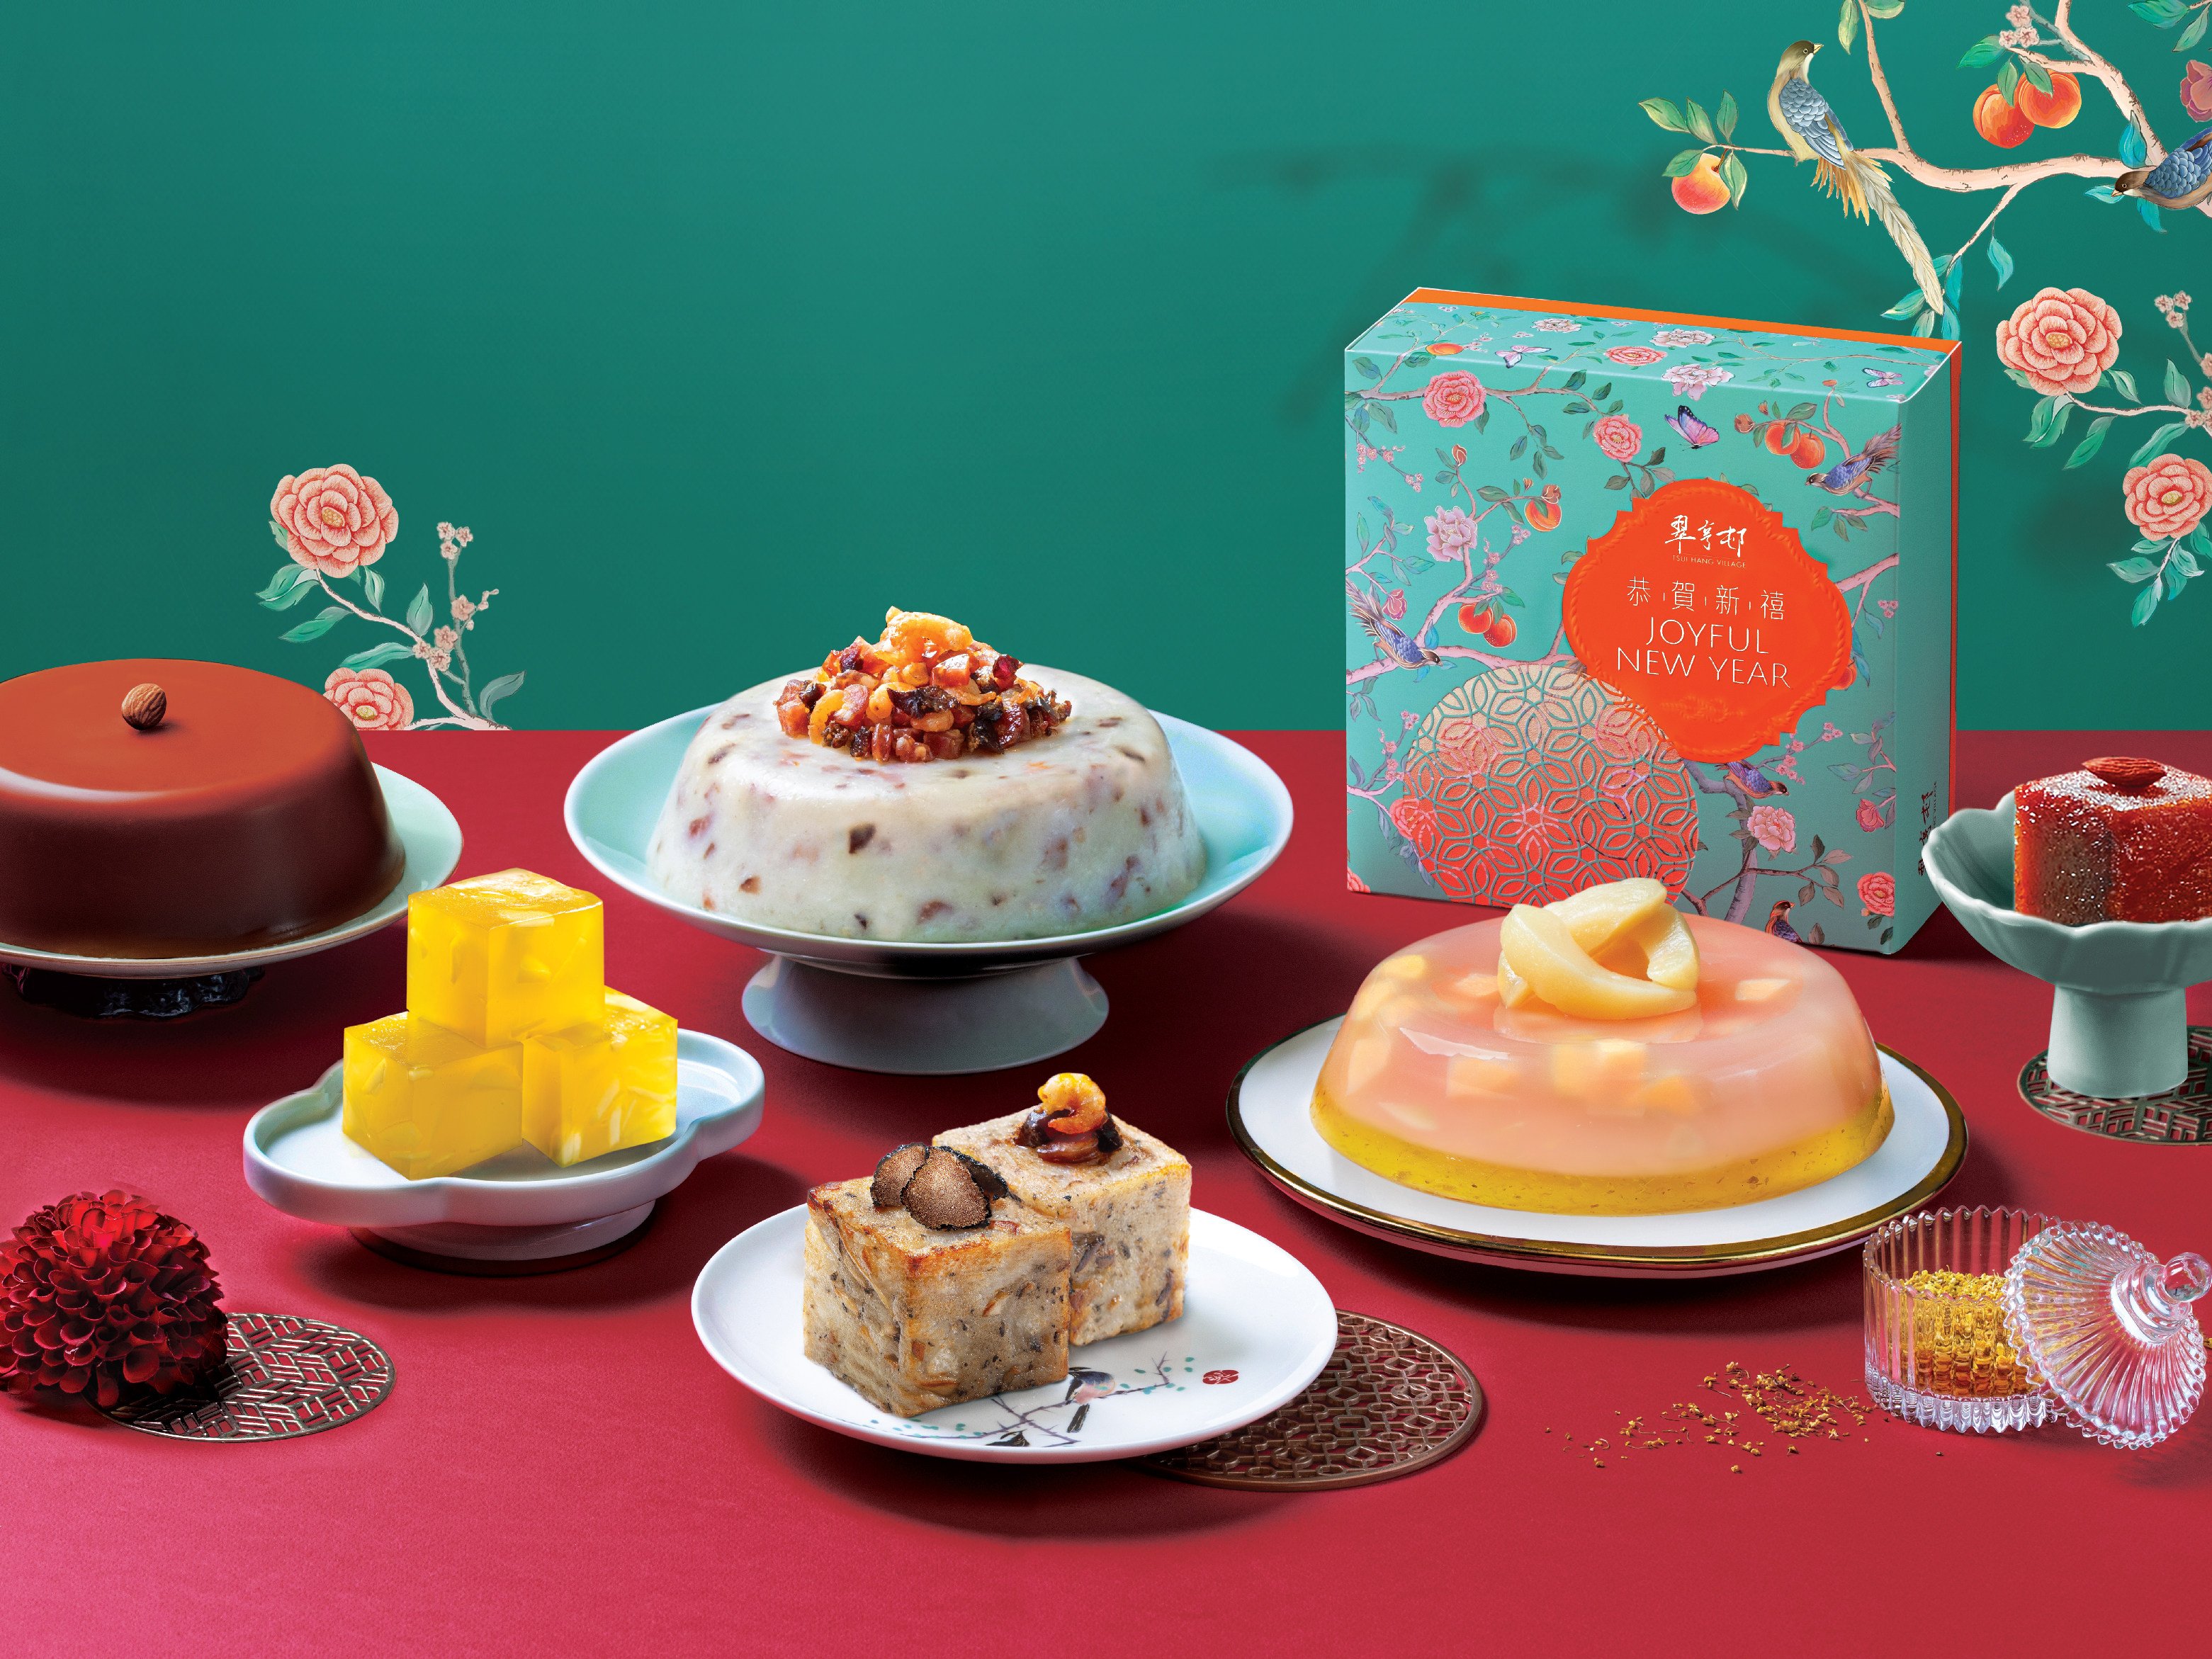 Assorted Chinese New Year puddings from Tsui Hang Village. Order your puddings early to save money and avoid disappointment – see our pick of the early-bird discounts from 10 Hong Kong restaurants and hotels. Photo: Tsui Hang Village